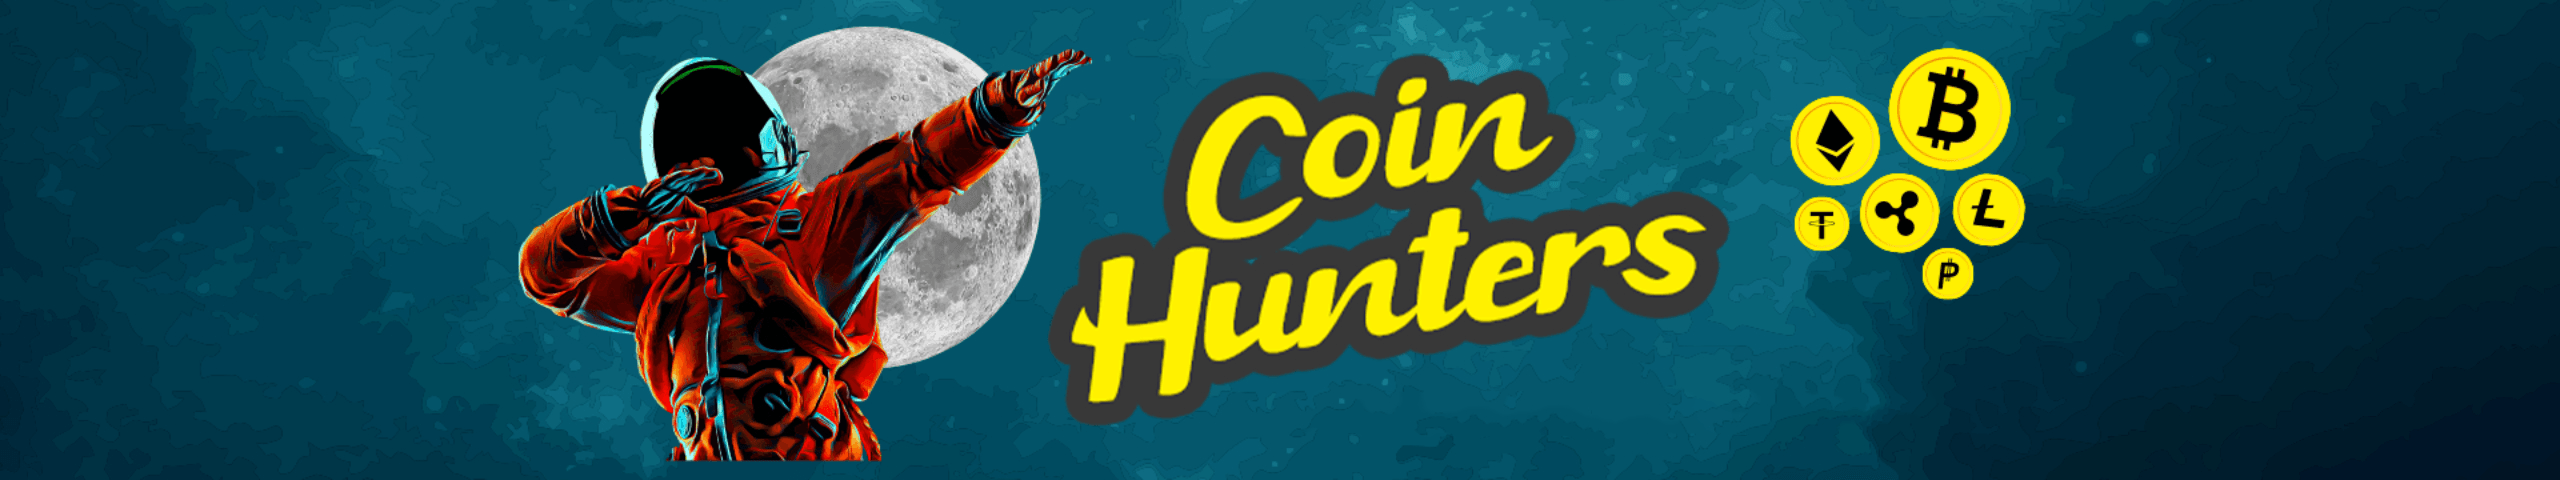 coinhunters.png